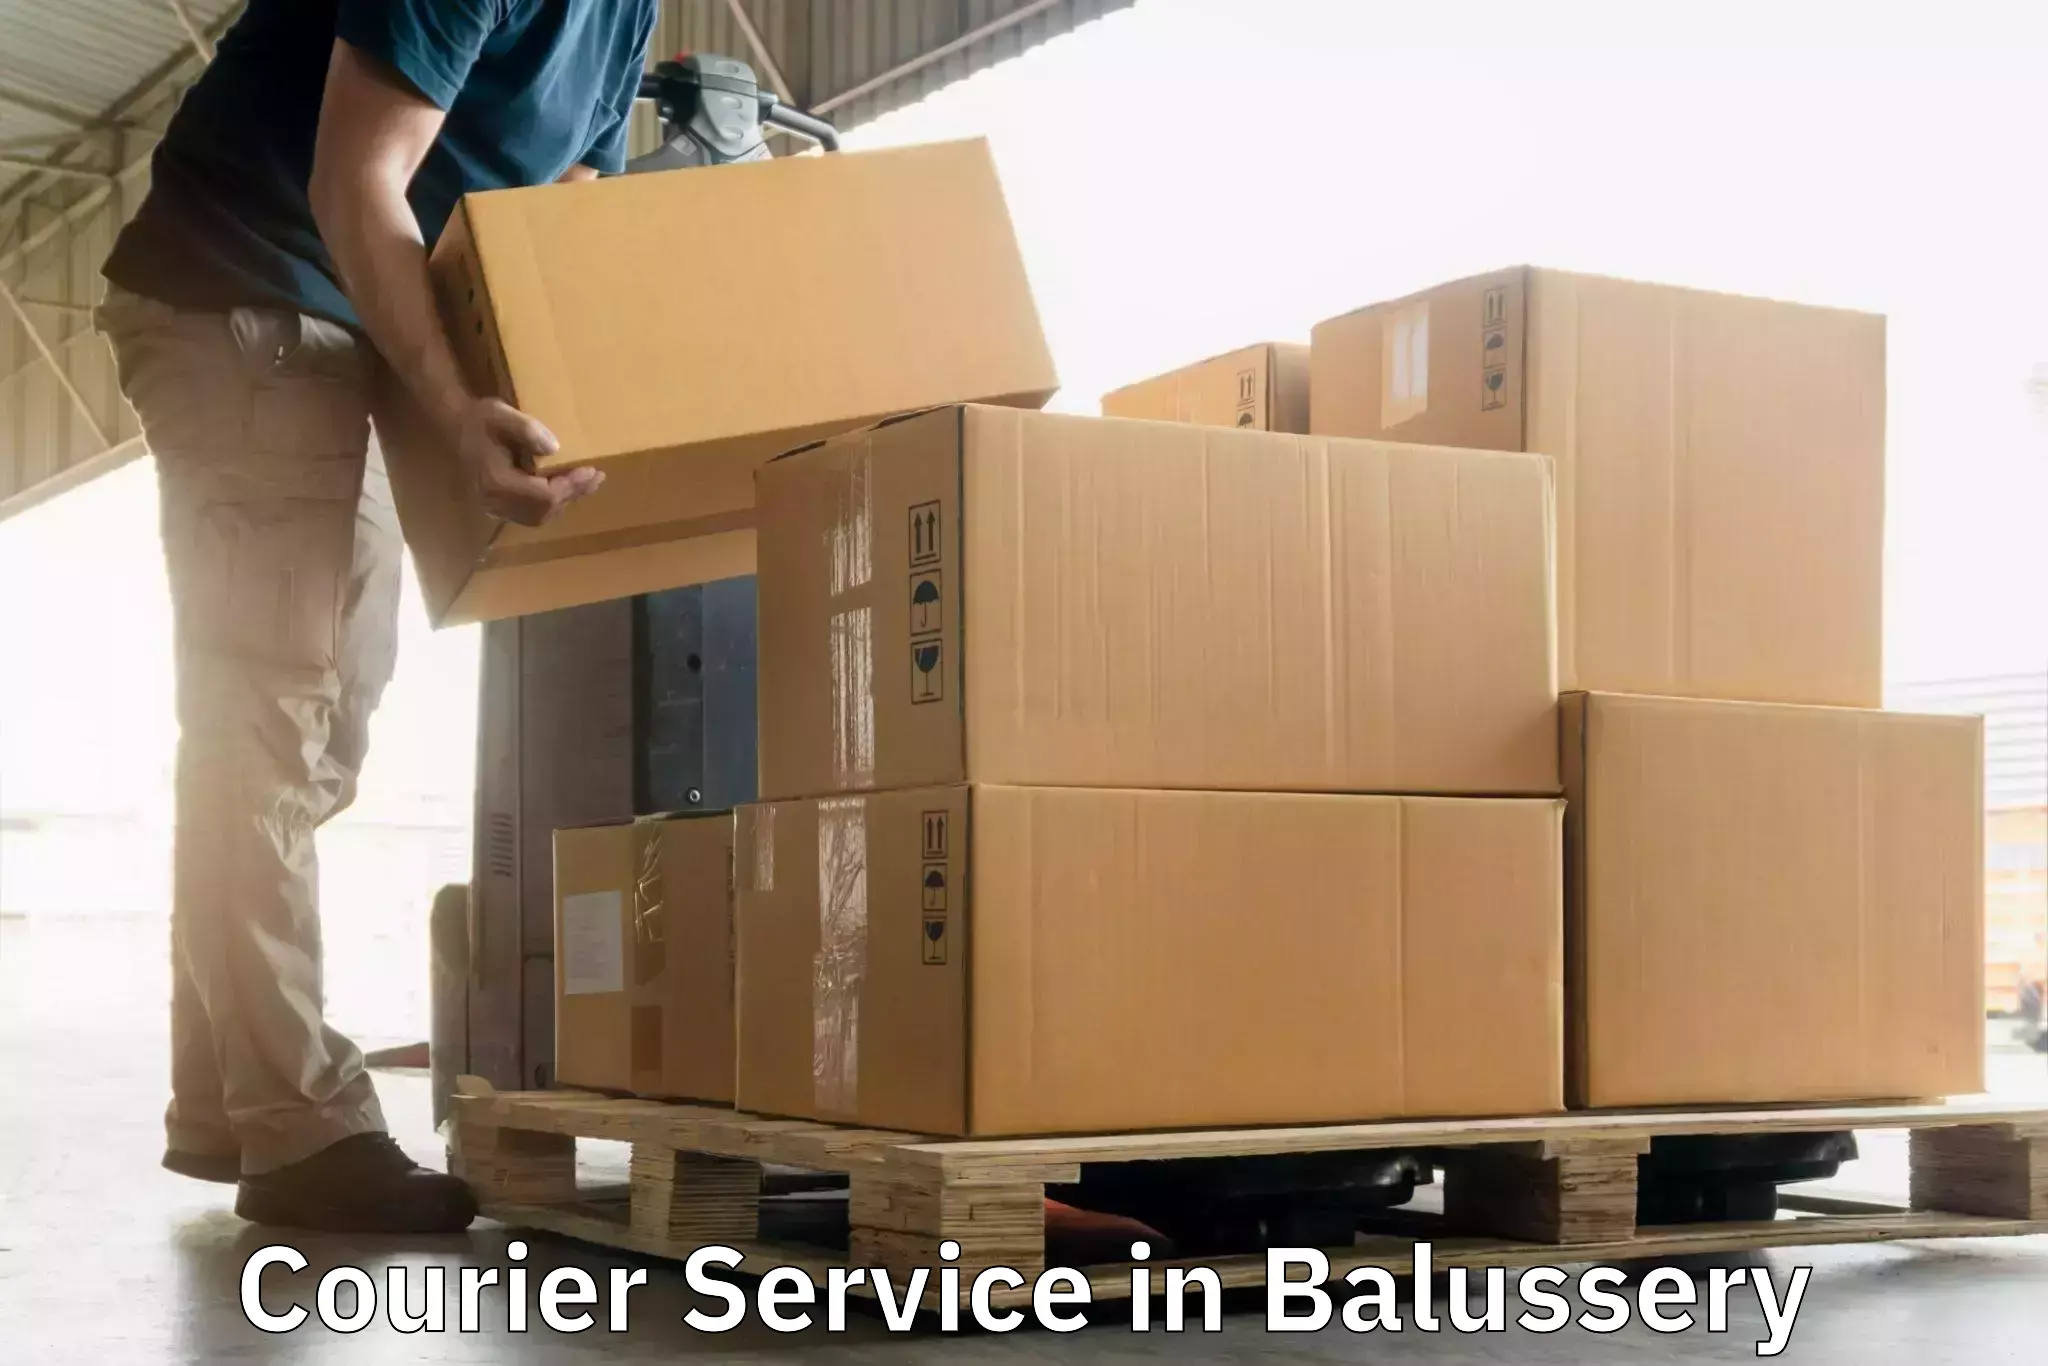 Emergency parcel delivery in Balussery